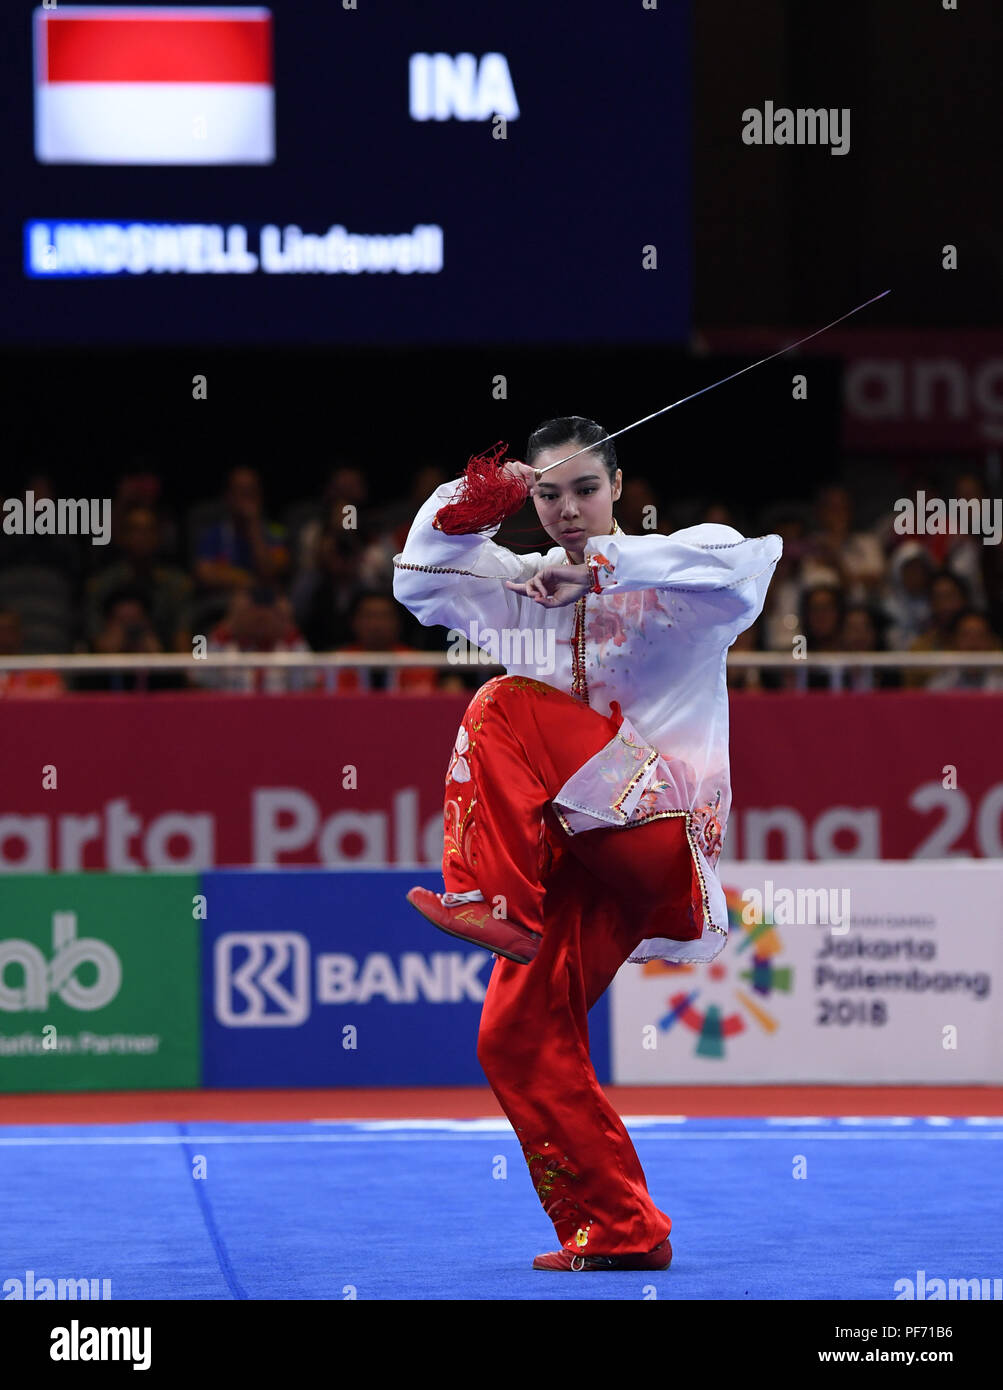 (180820) -- JAKARTA, Aug. 20, 2018 (Xinhua) -- Lindswell Lindswell of Indonesia competes during Women's Taijijian contest in the 18th Asian Games in Jakarta, Indonesia, Aug. 19, 2018. (Xinhua/Pan Yulong) Stock Photo